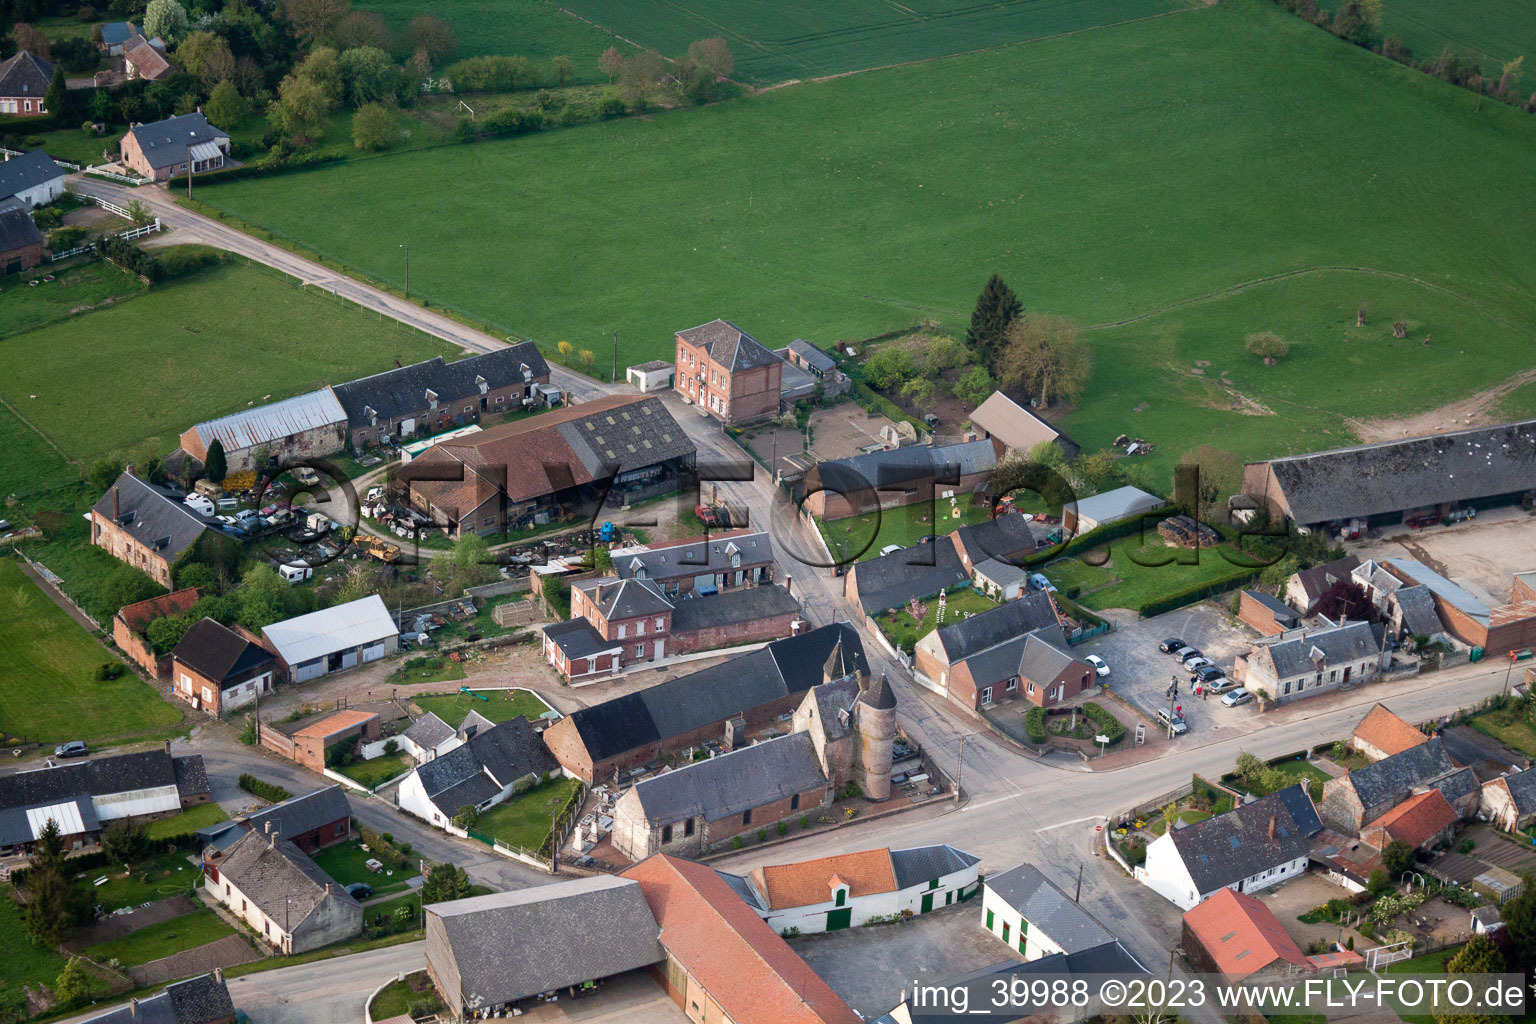 Aerial photograpy of Monceau-sur-Oise in the state Aisne, France